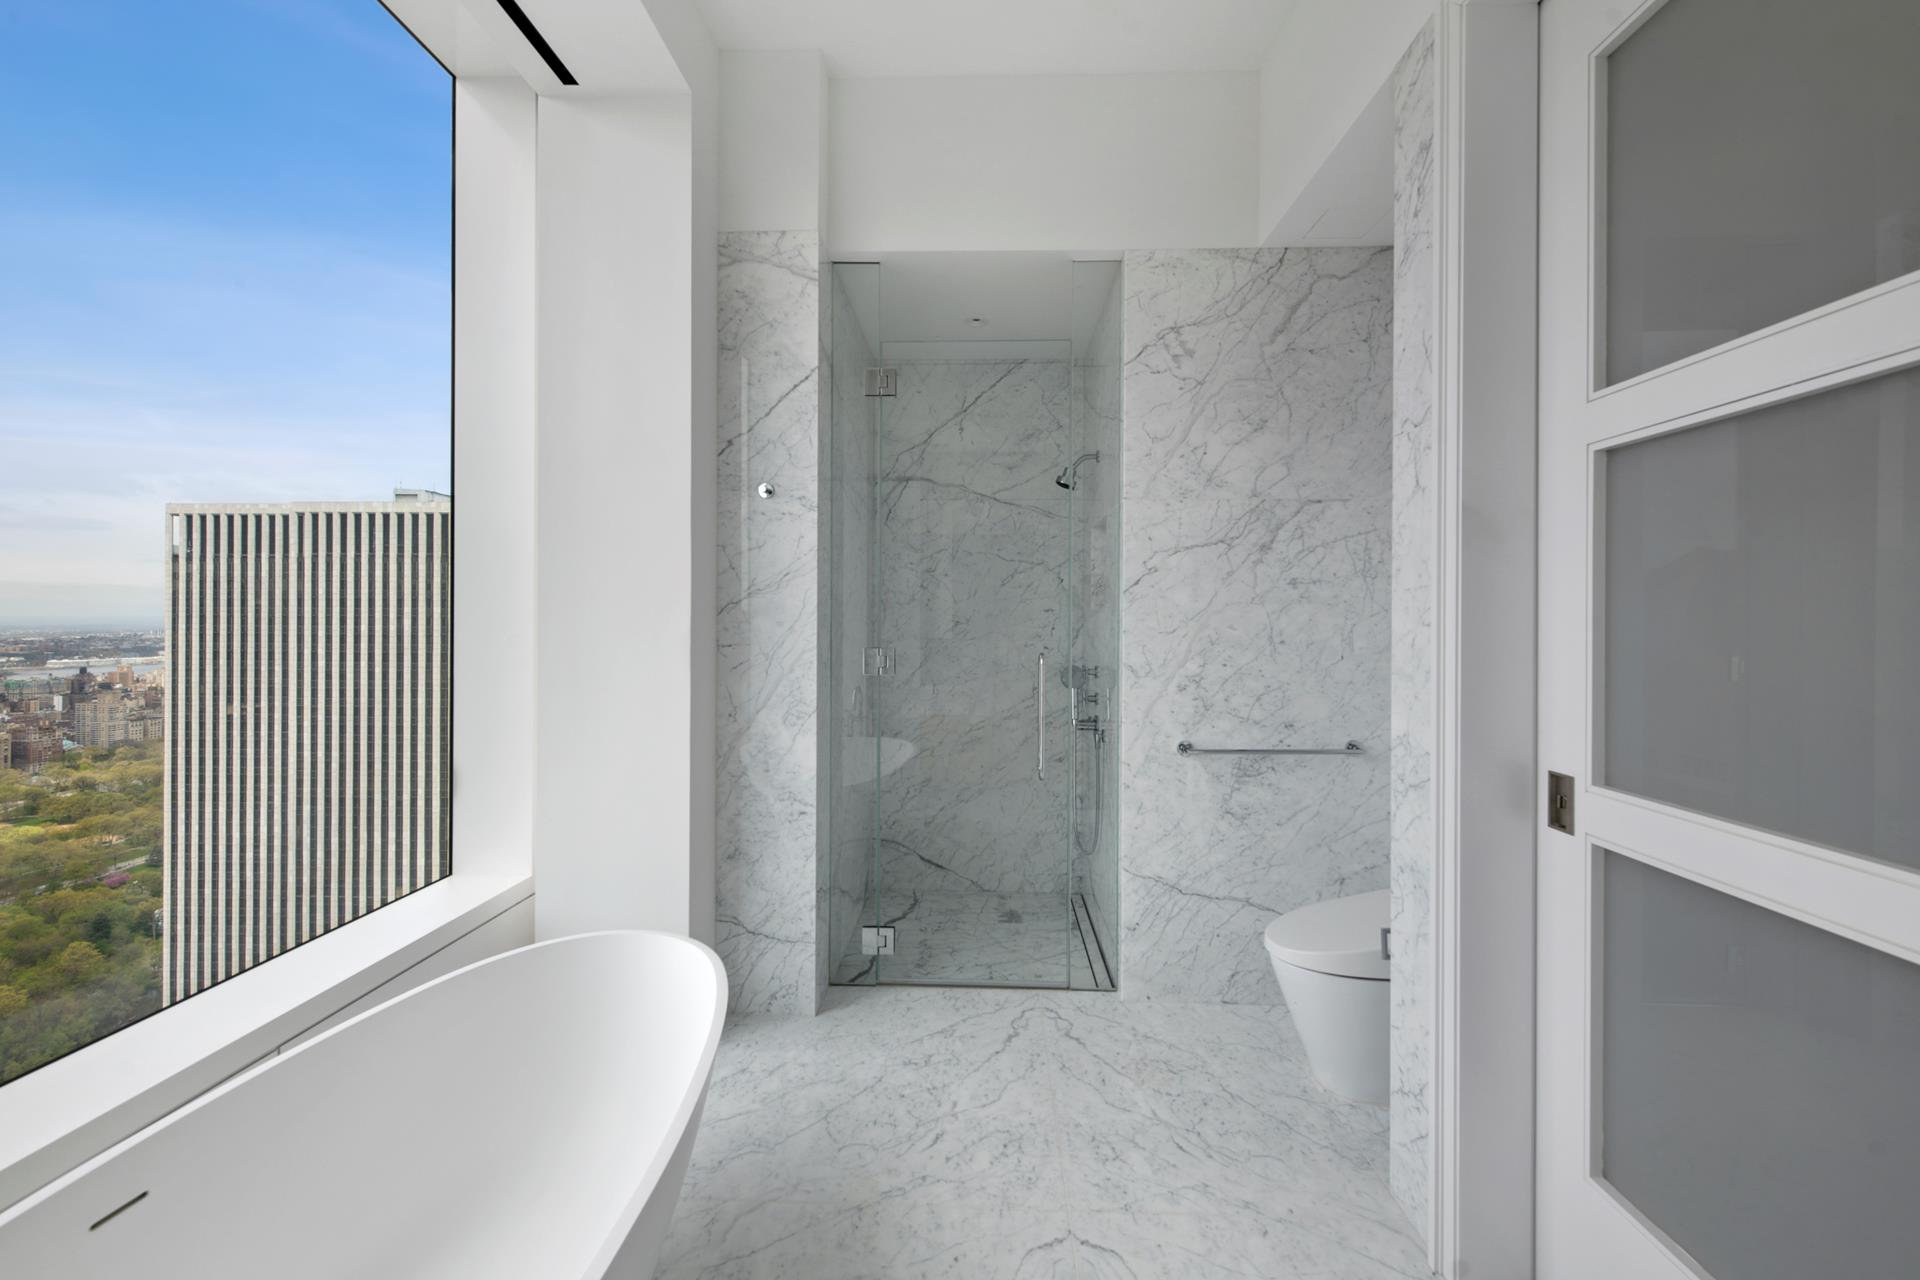 a bathroom with a granite countertop bathtub shower and toilet